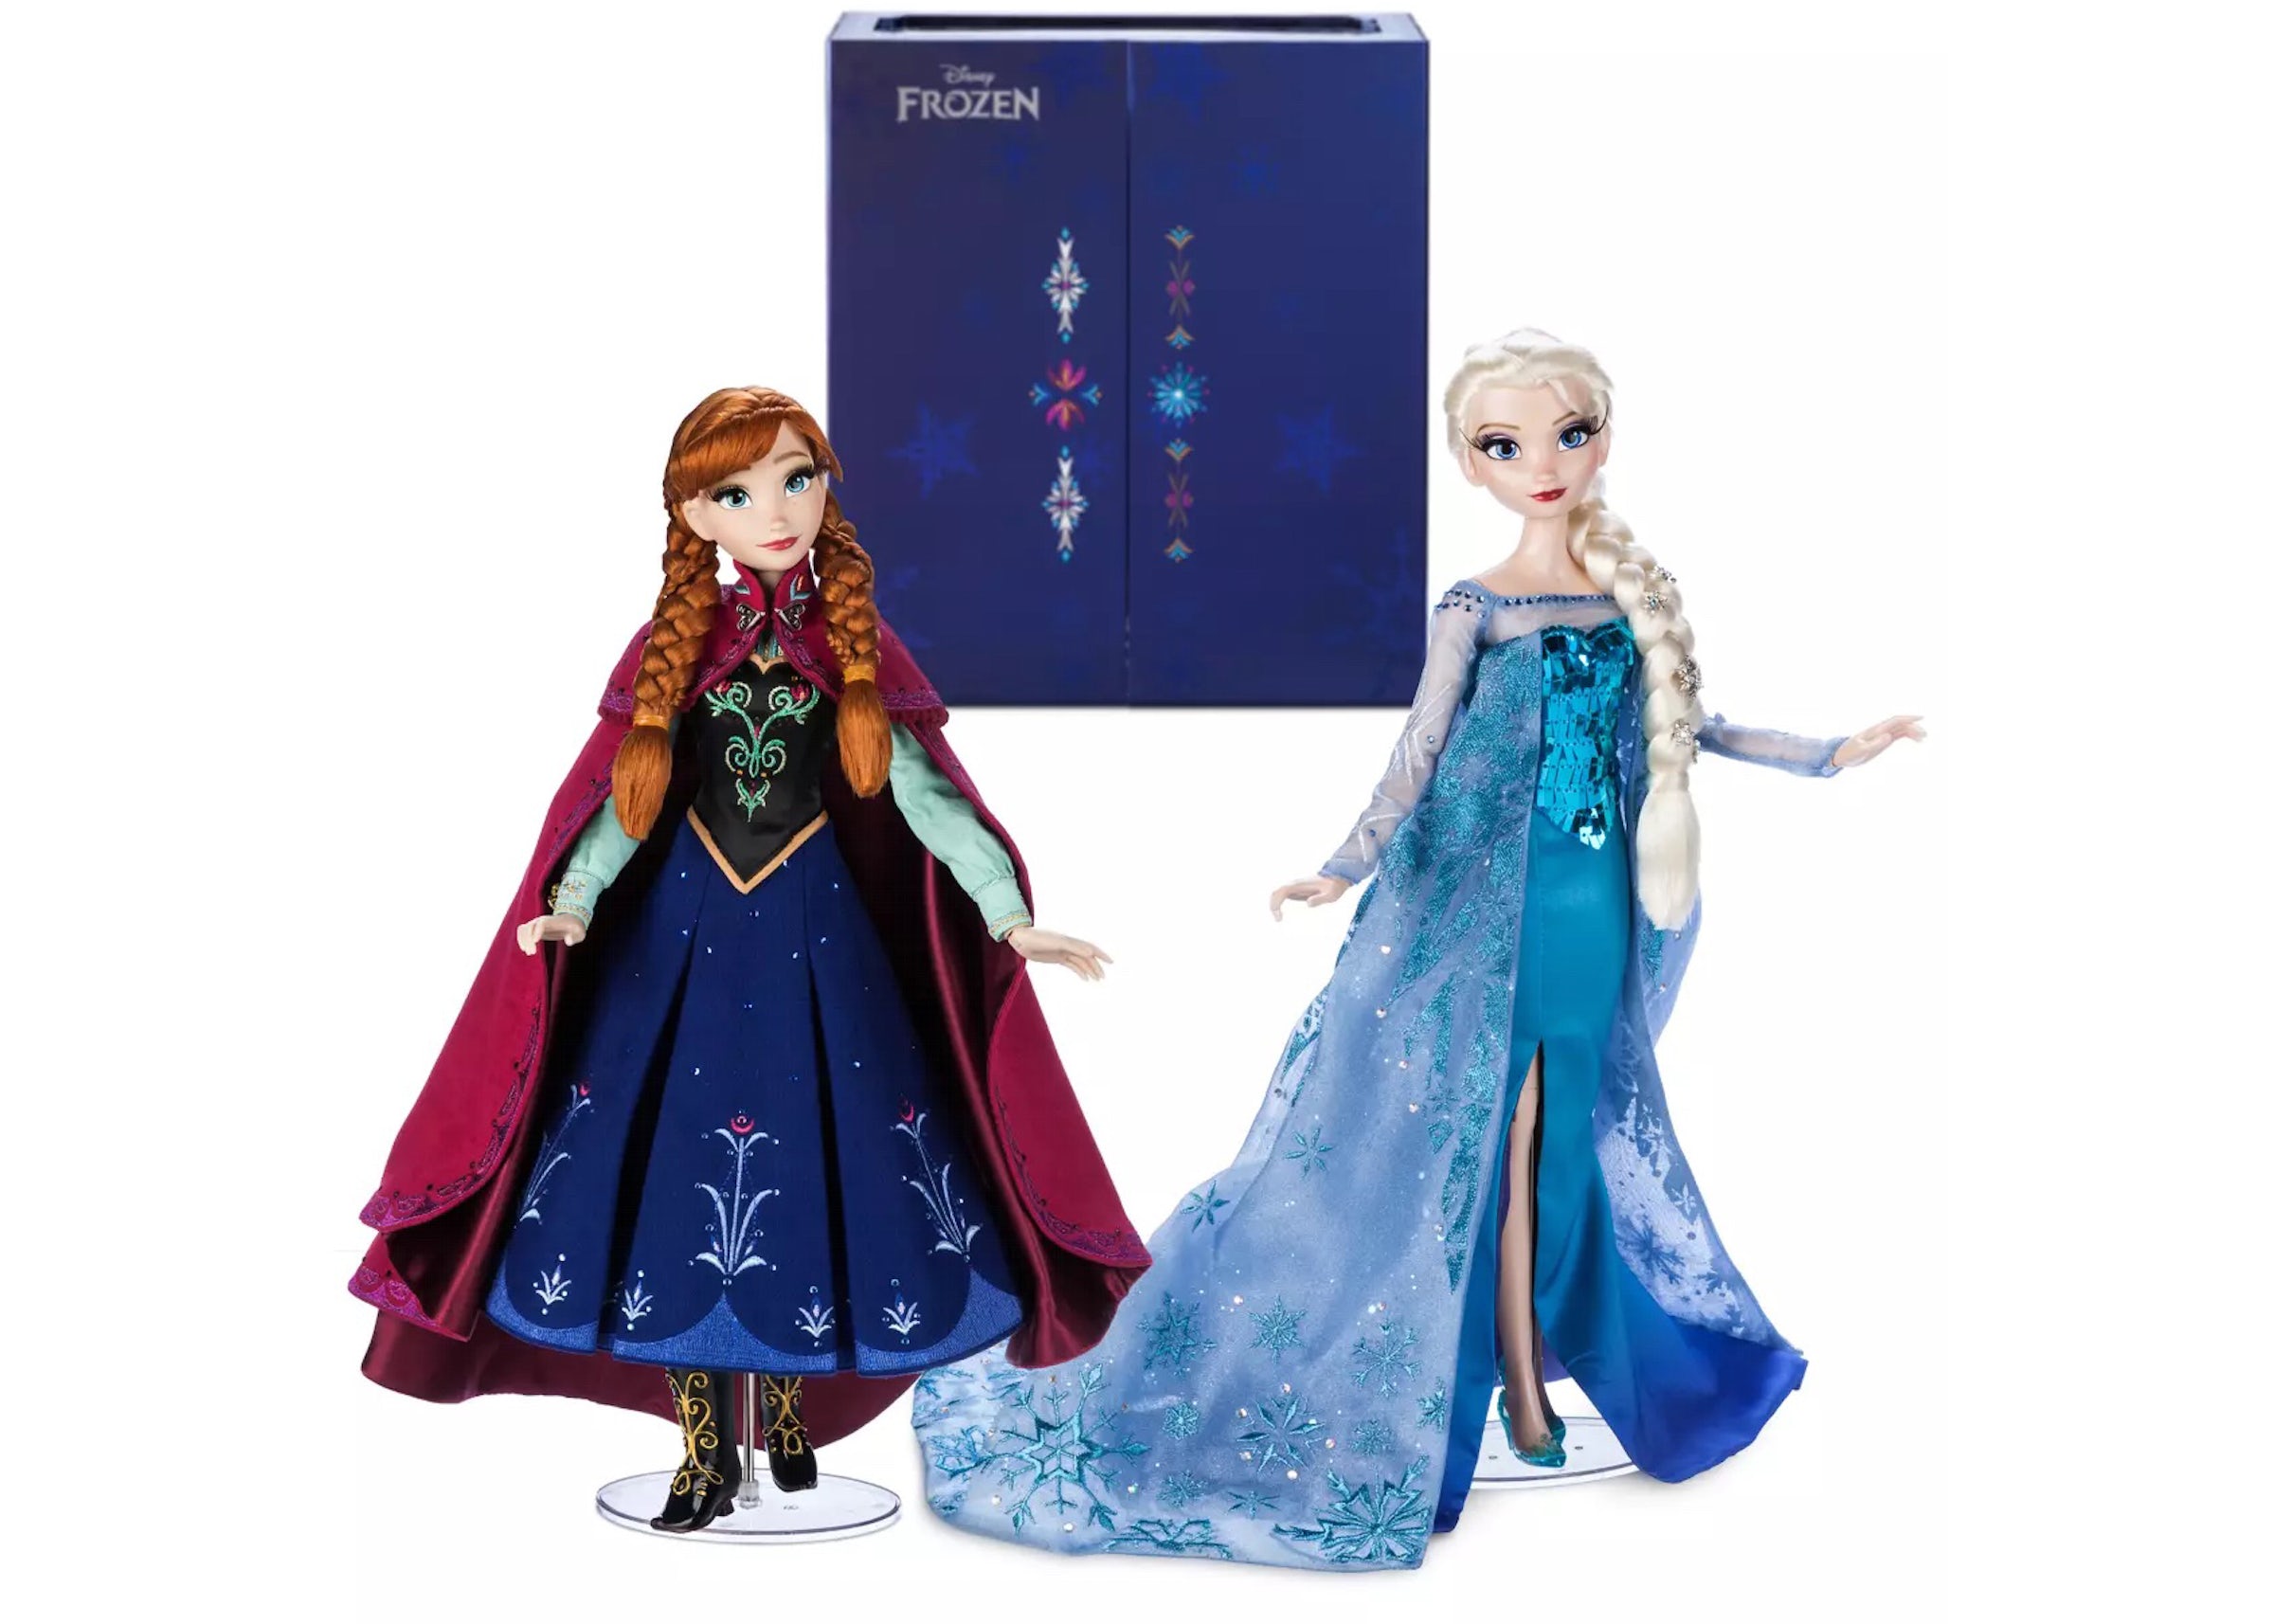 Disney Frozen 10th Anniversary Anna and Elsa Limited Edition Doll Set